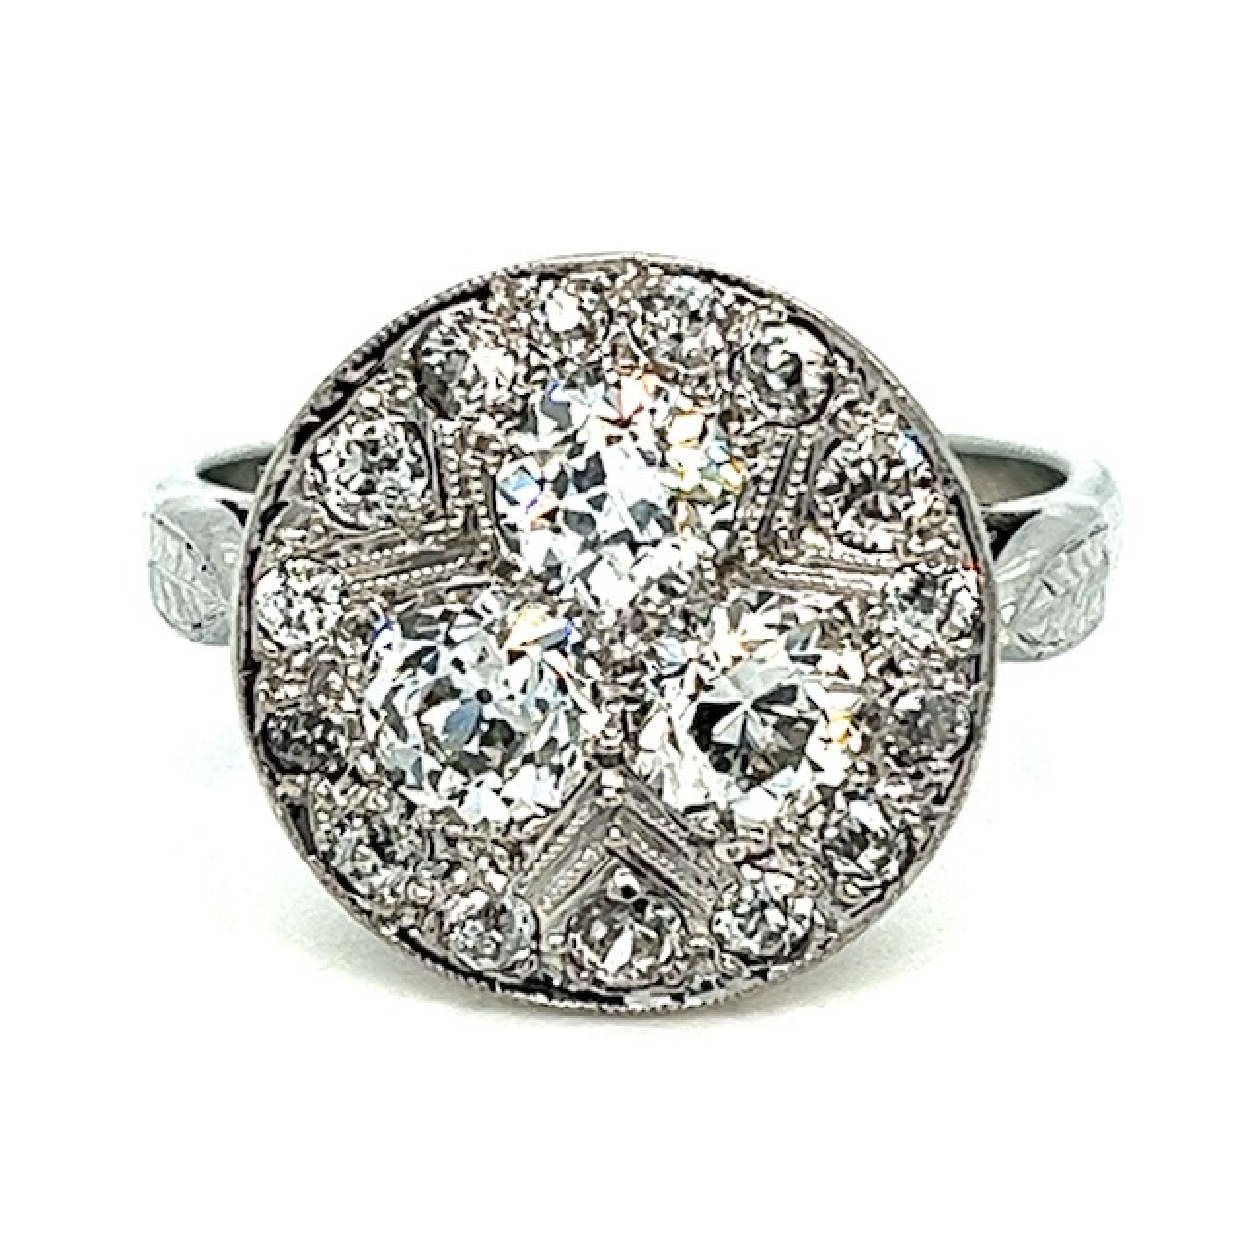 18K White Gold and Platinum Antique Diamond Ring with Filigree Size 7